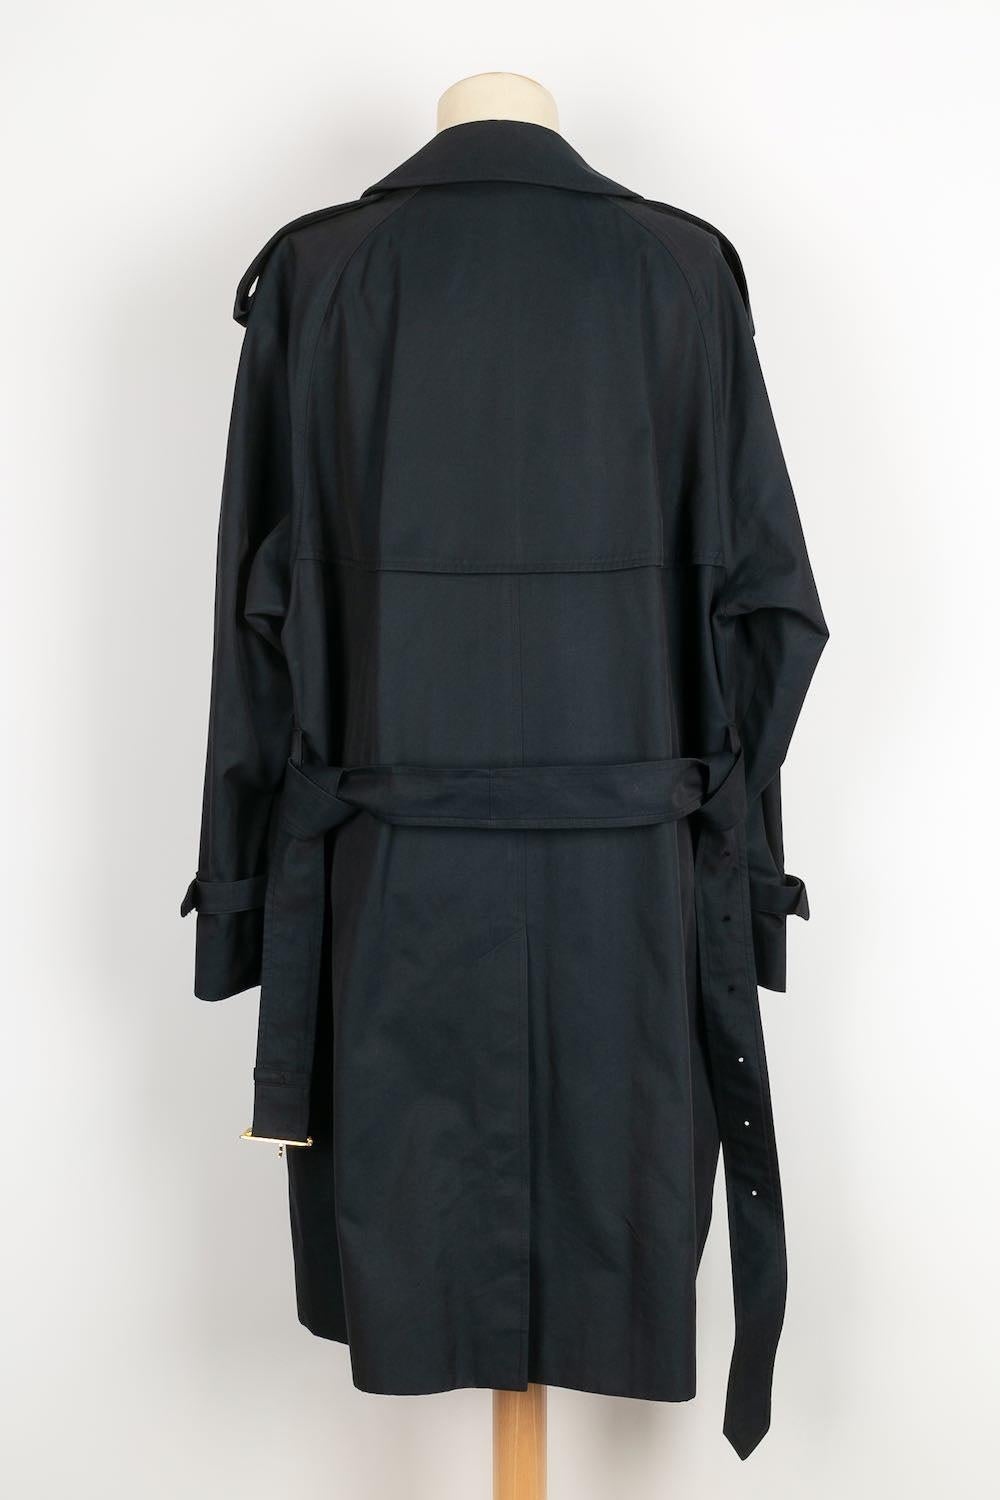 Christian Dior Navy Blue Trench Coat In Excellent Condition For Sale In SAINT-OUEN-SUR-SEINE, FR